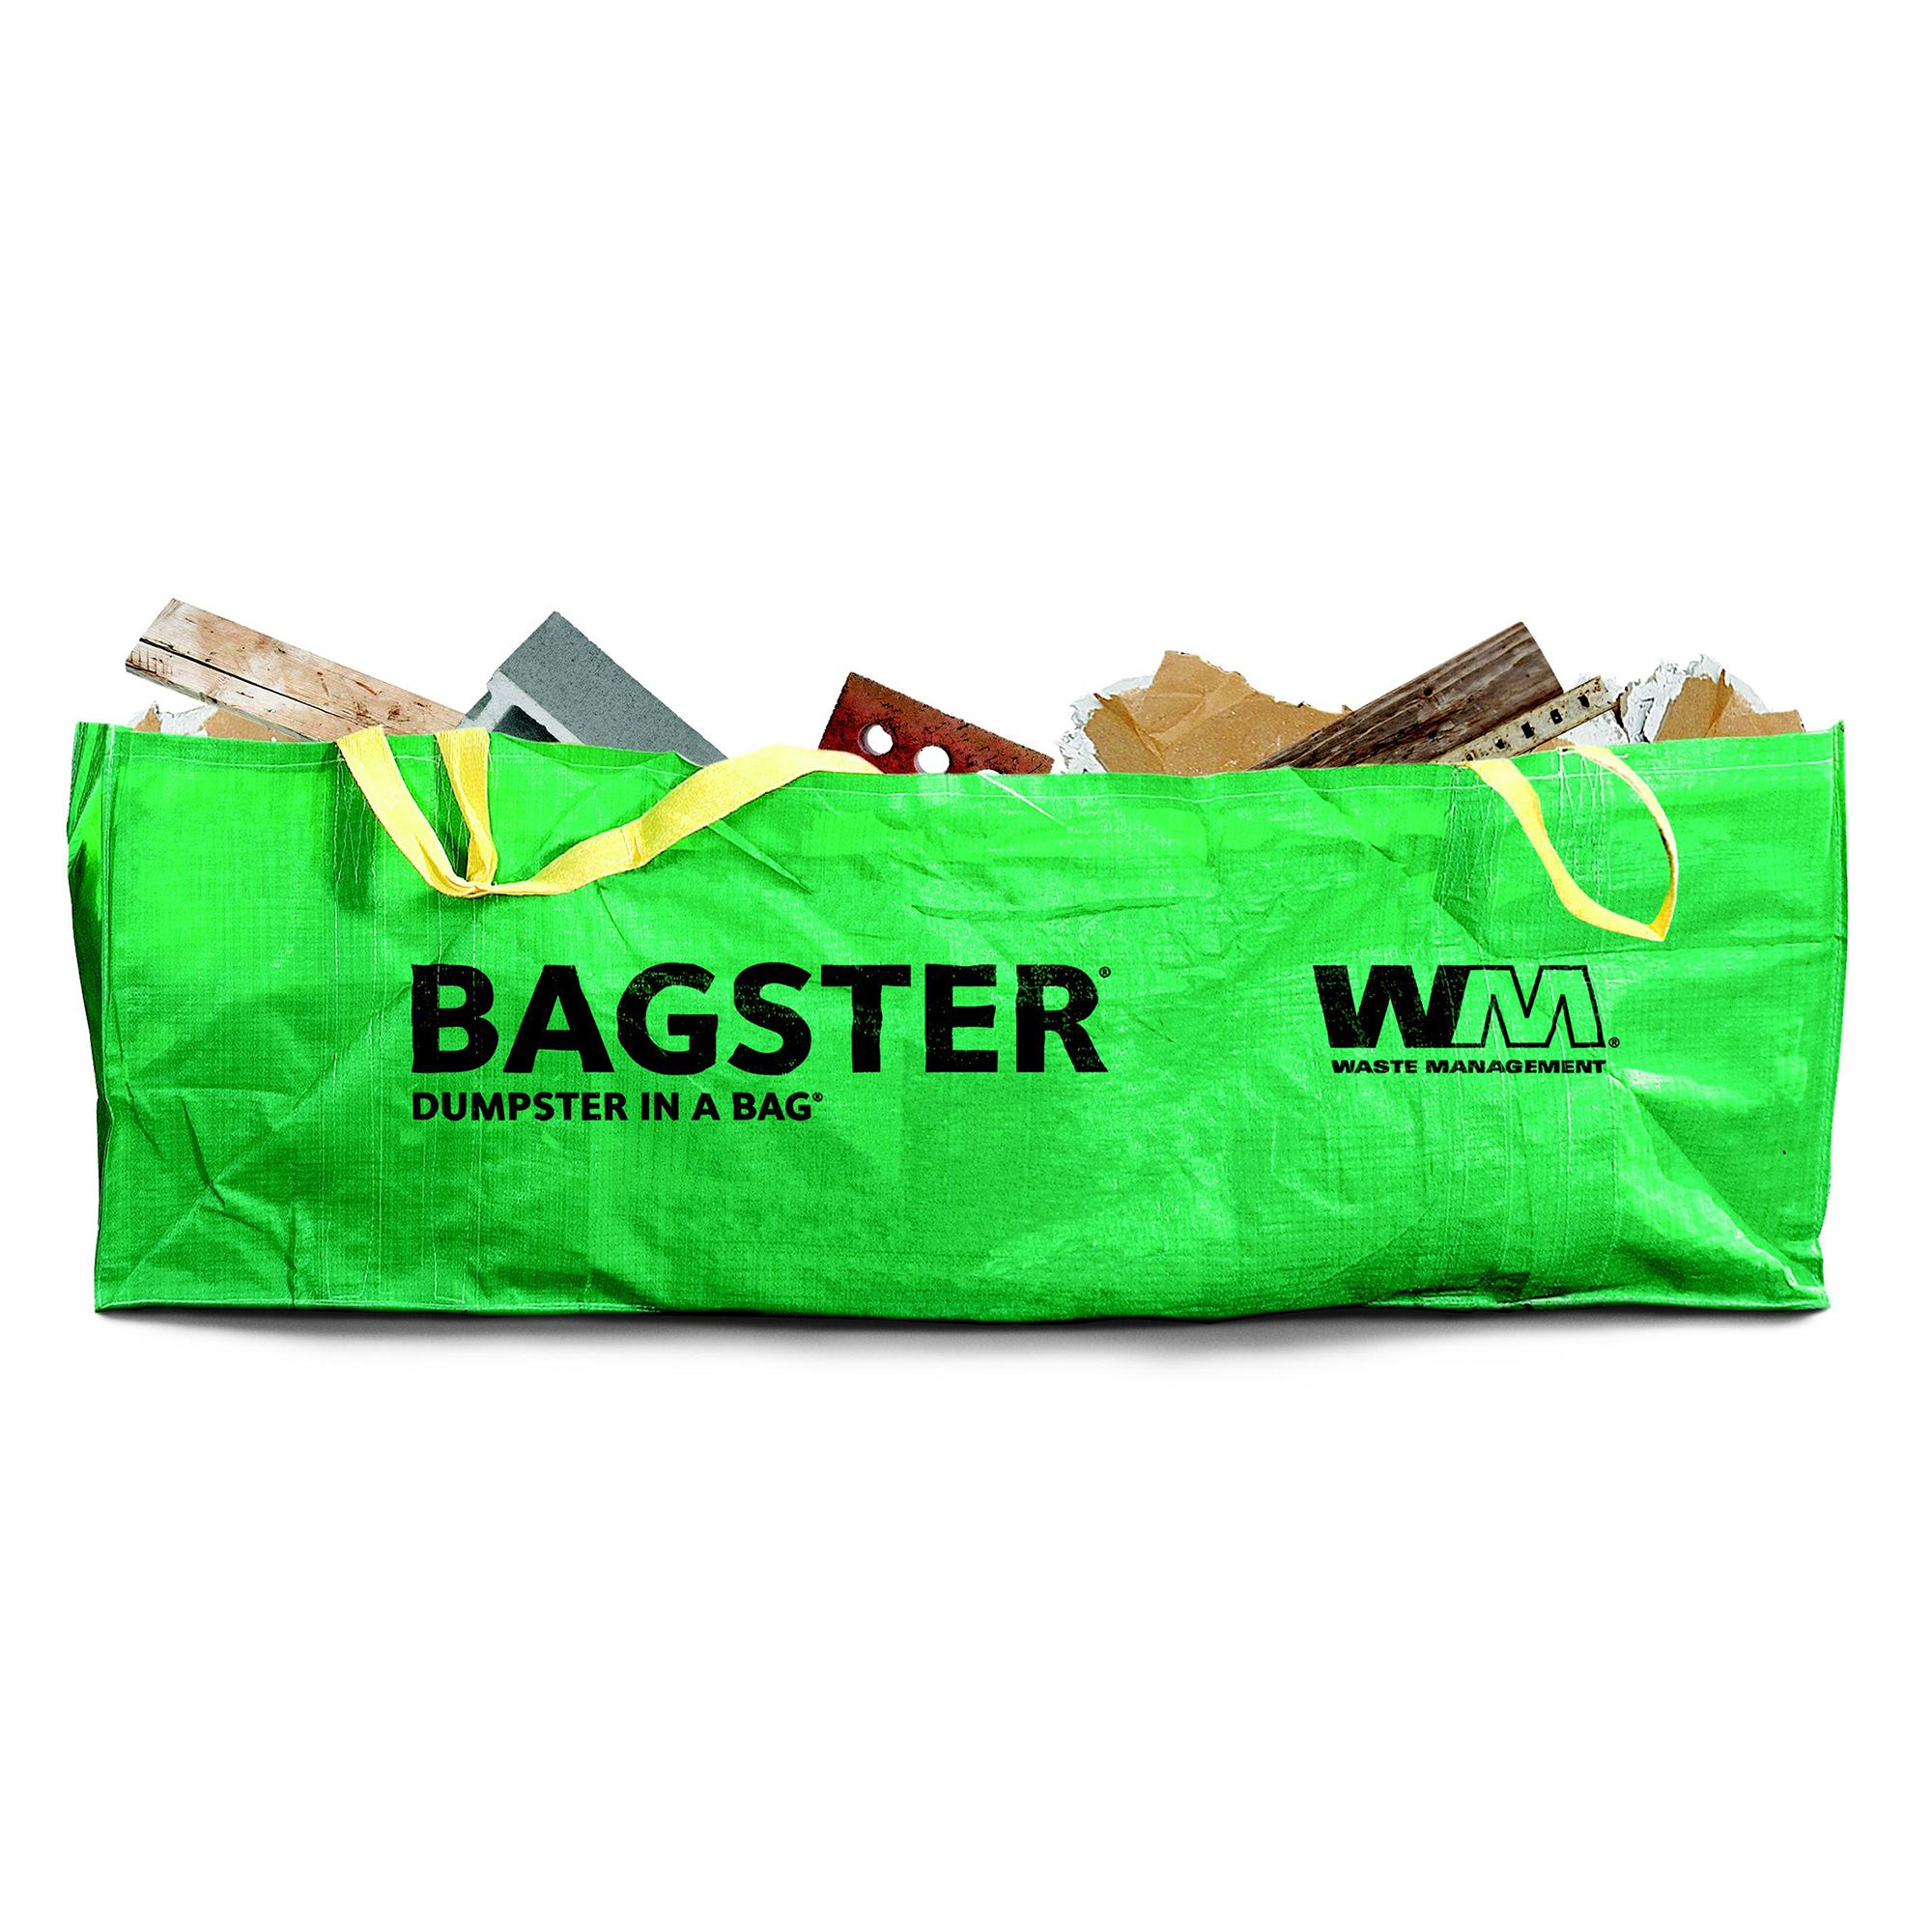 Bagster® Dumpster in a Bag® in Green